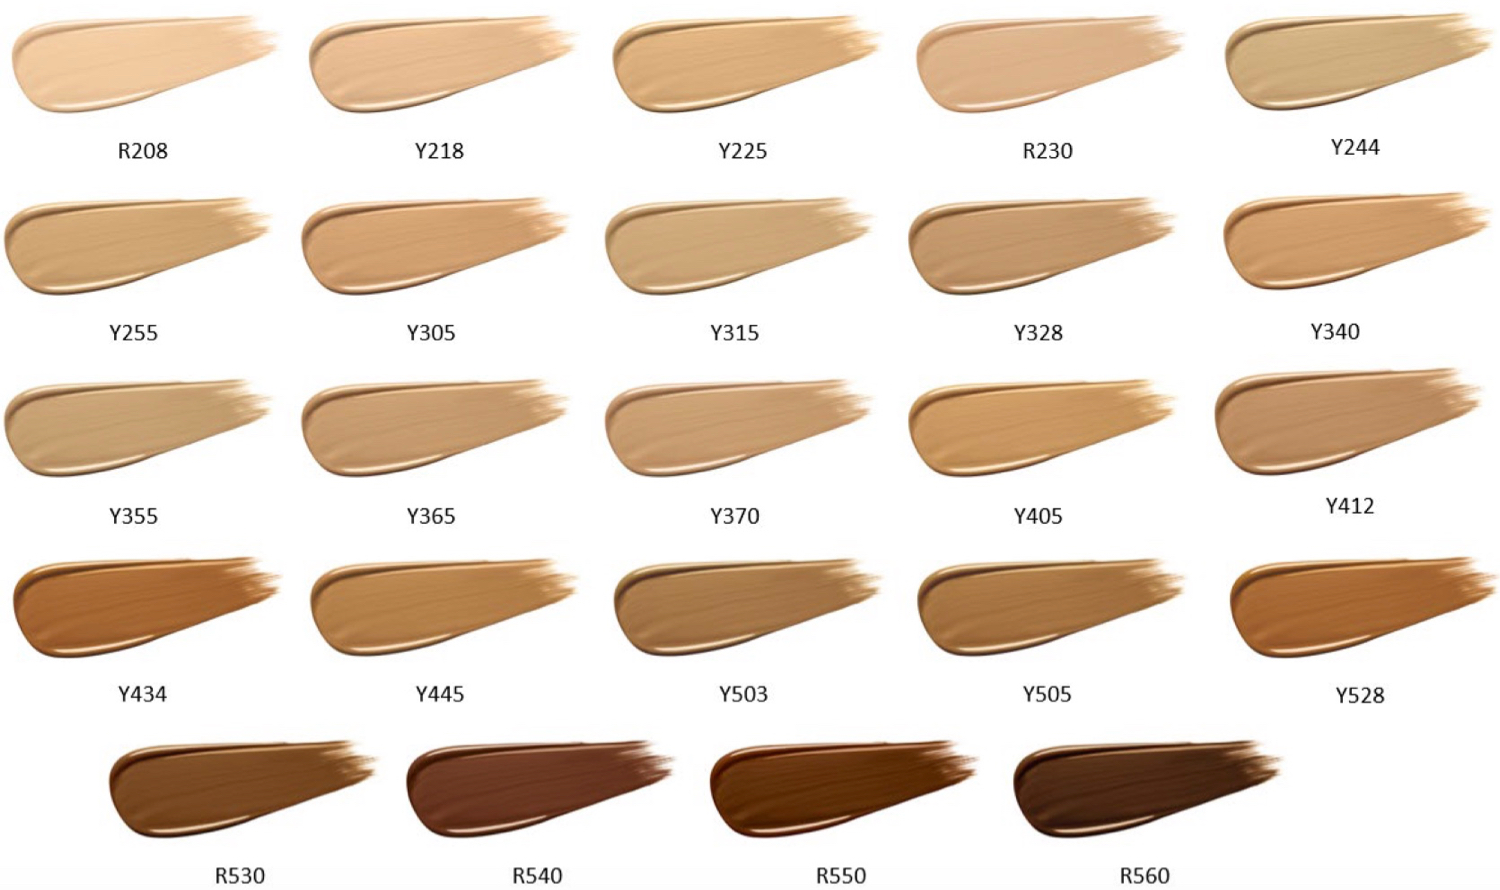 MAKE UP FOR EVER REBOOT Foundation Swatches All Shades